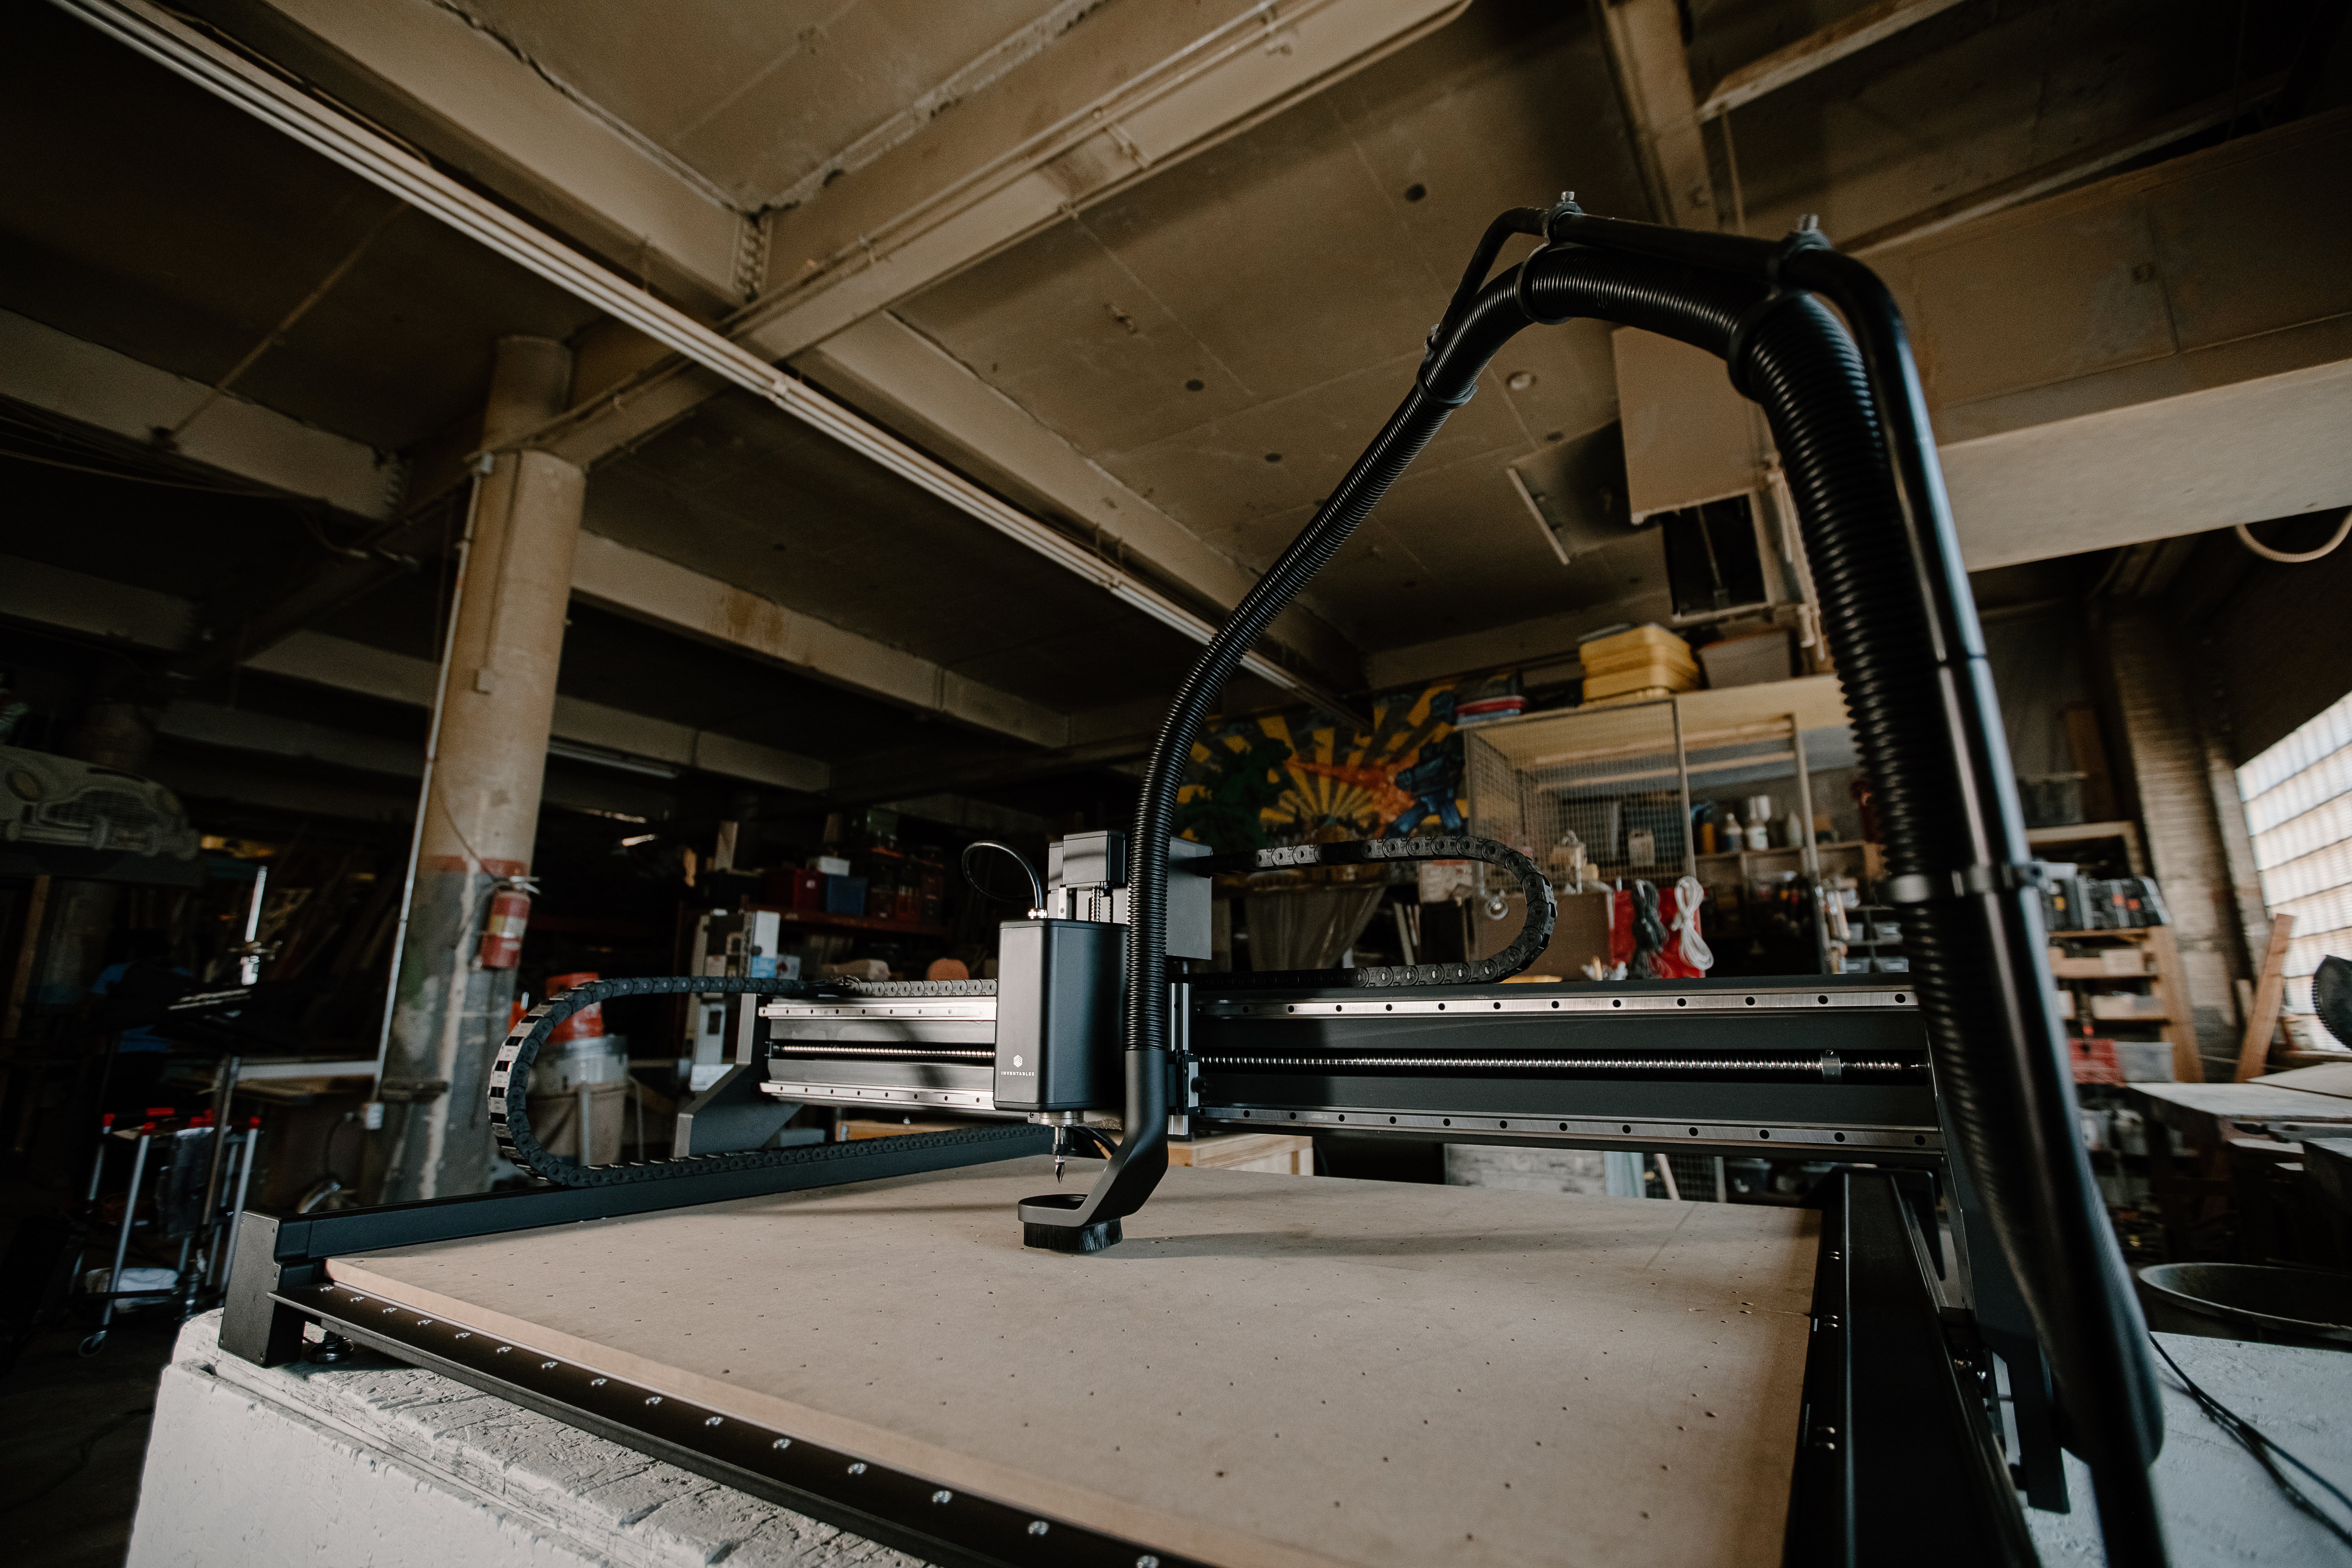 The X-Carve Pro by Inventables